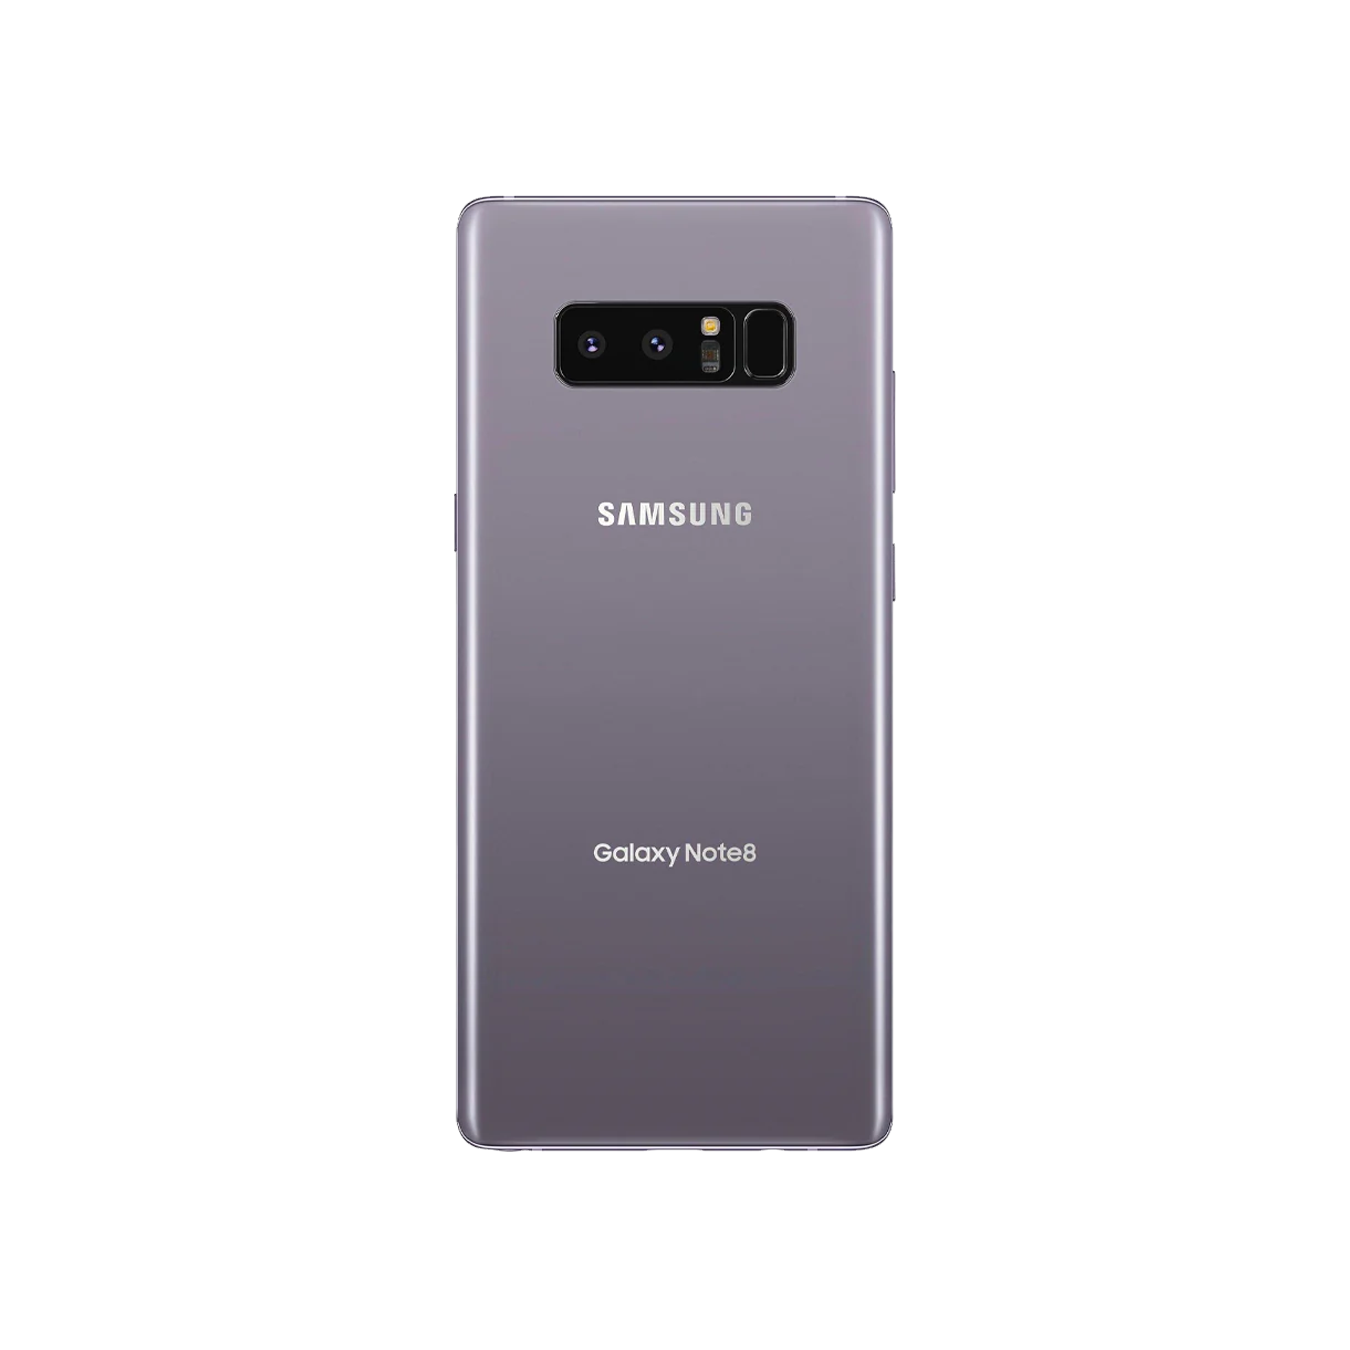 Samsung Galaxy Note8 network unlock, remove SIM restrictions for global use, available at cleanimei.com